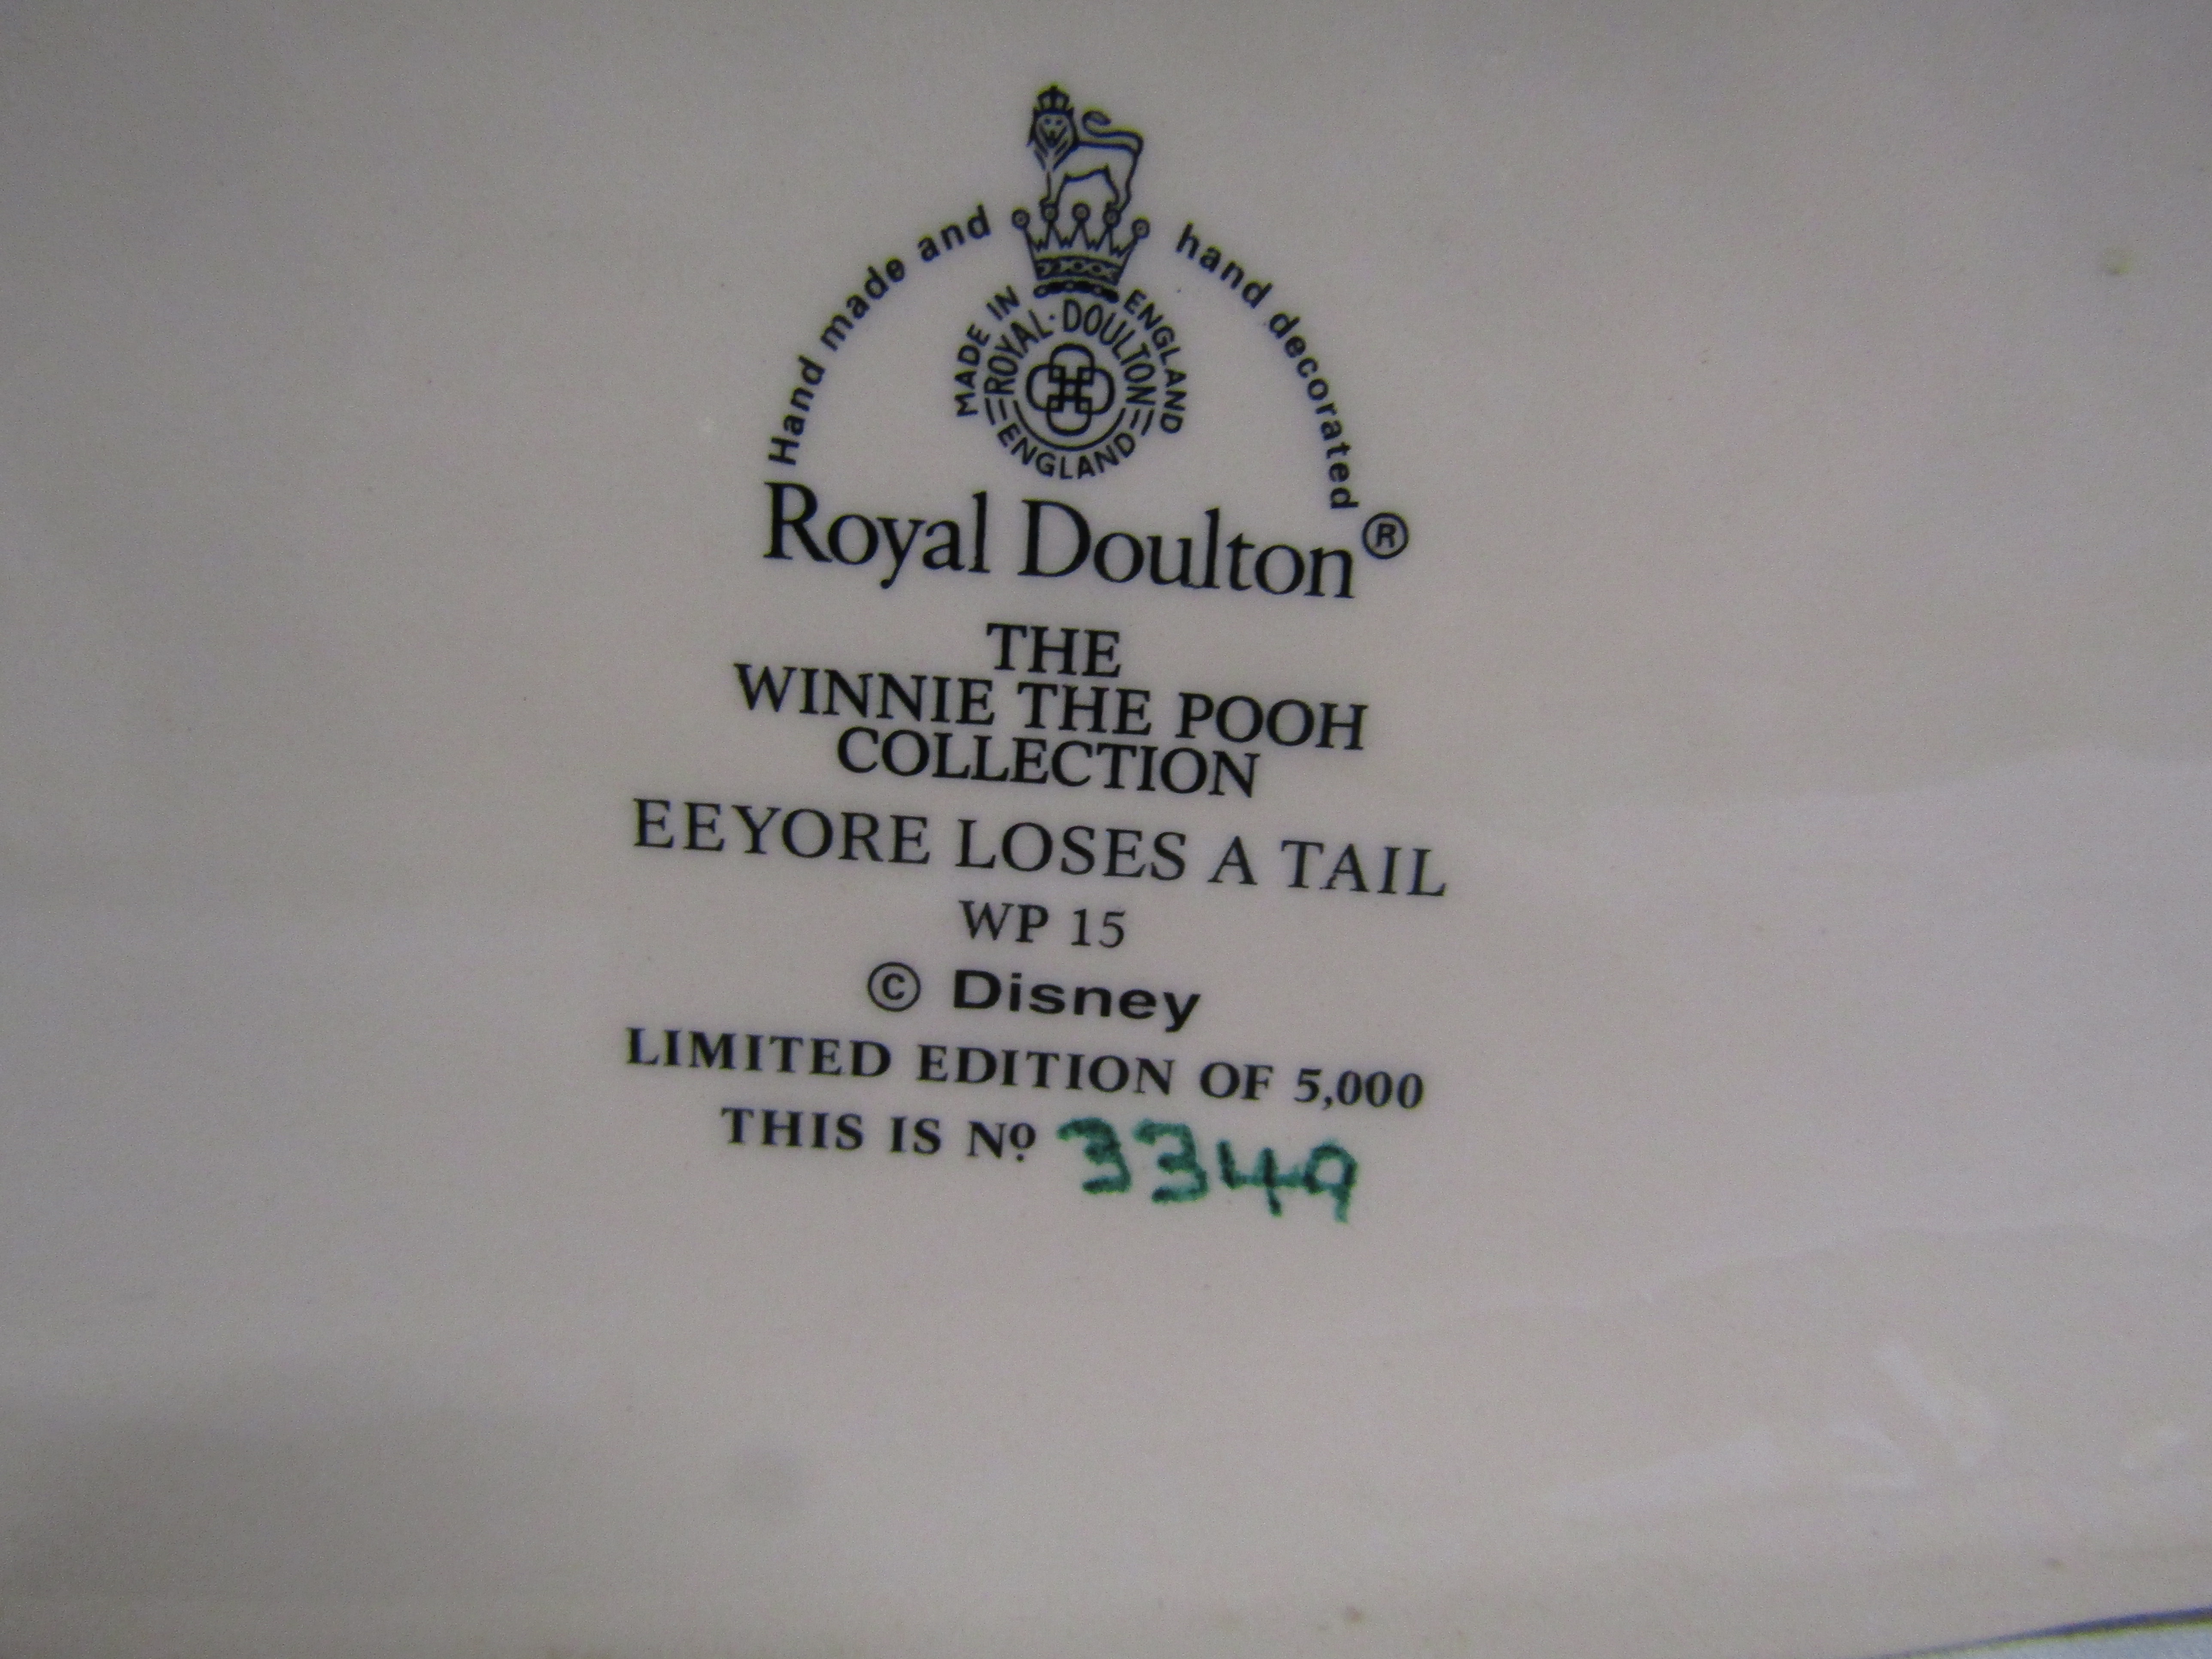 Royal Doulton Winnie the Pooh Collection Figurines - Image 3 of 11